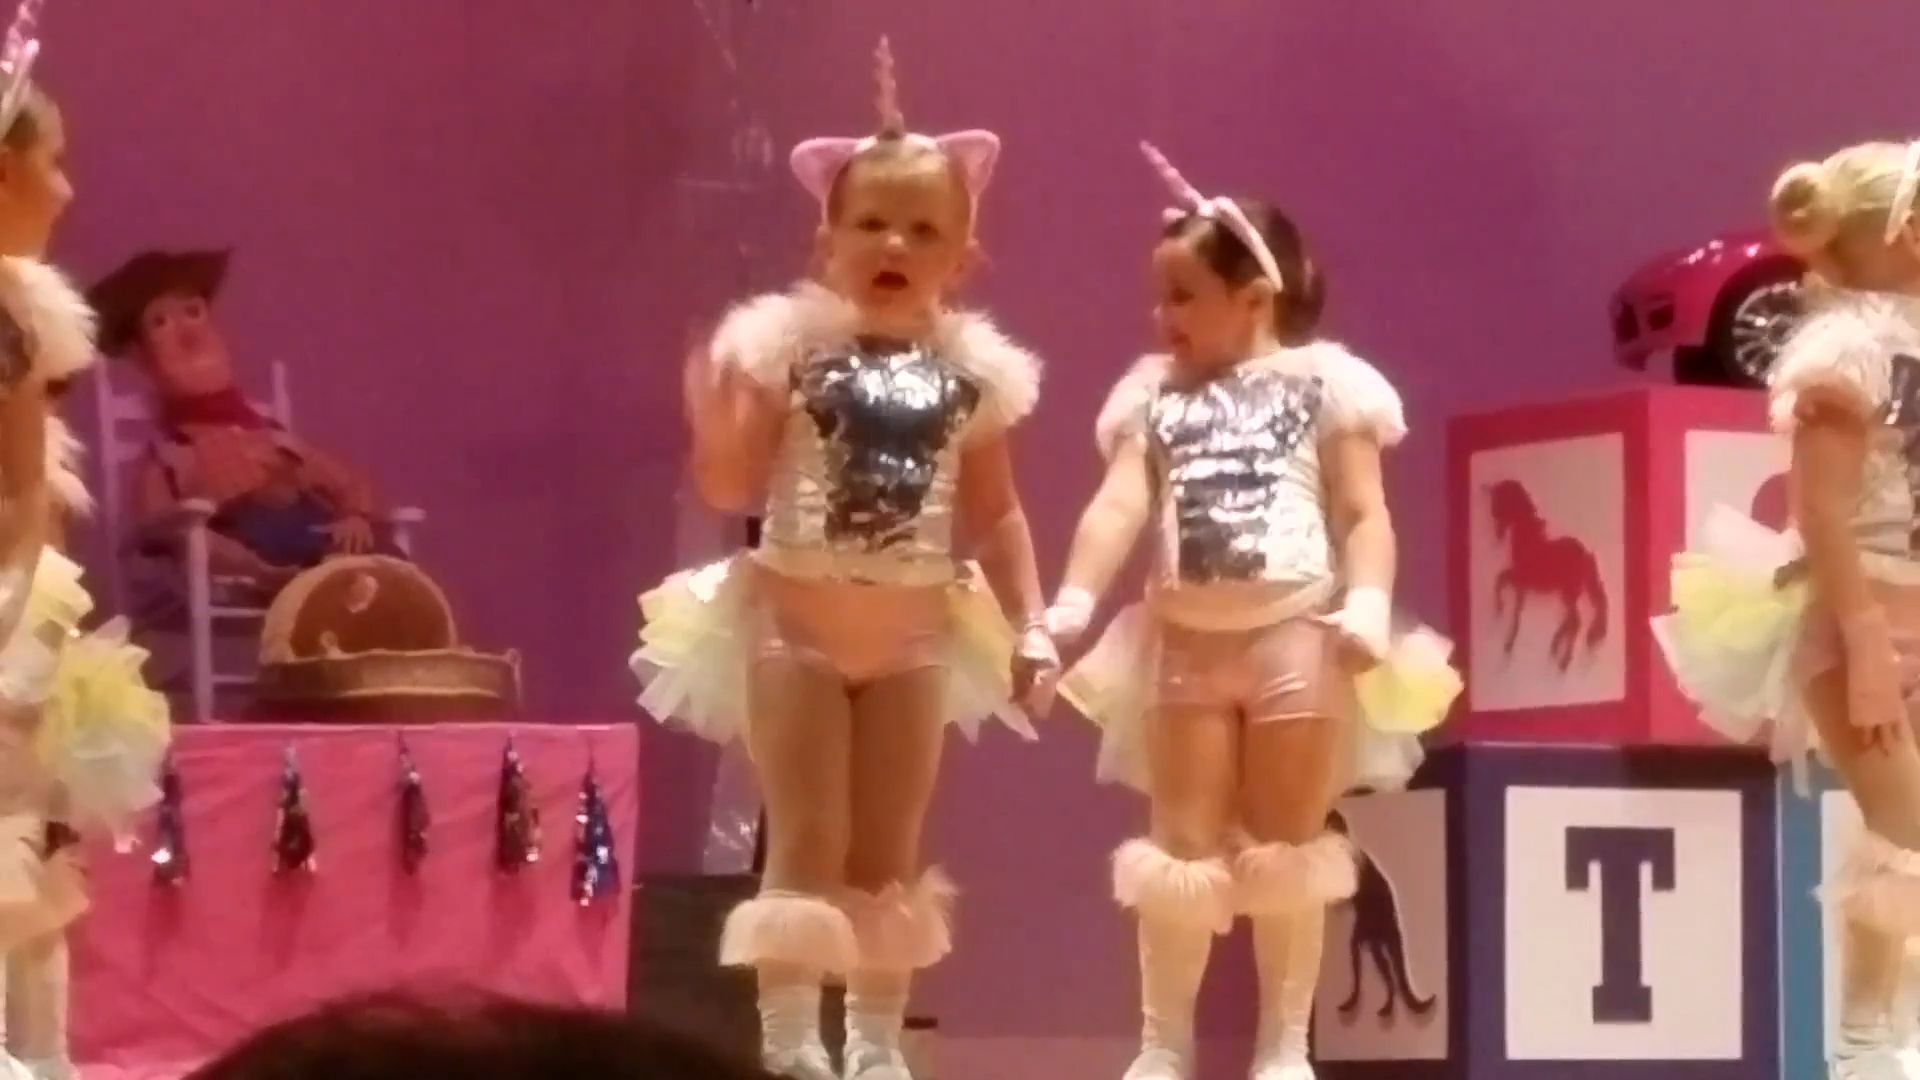 Little girl gives father a telling-off during her performance